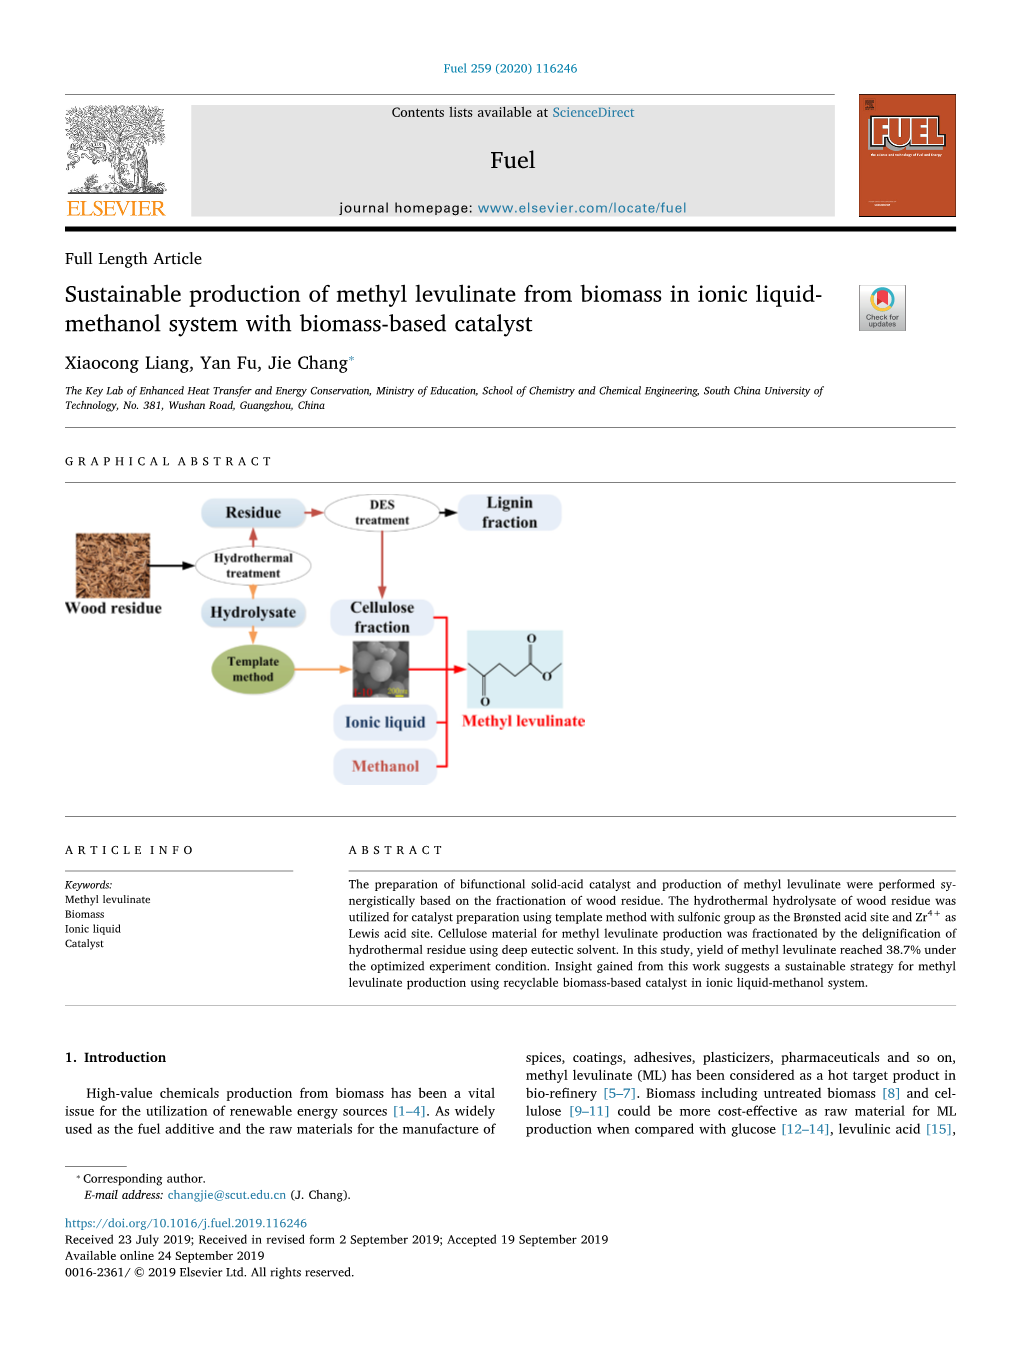 Sustainable Production of Methyl Levulinate from Biomass in Ionic Liquid- Methanol System with Biomass-Based Catalyst T ⁎ Xiaocong Liang, Yan Fu, Jie Chang